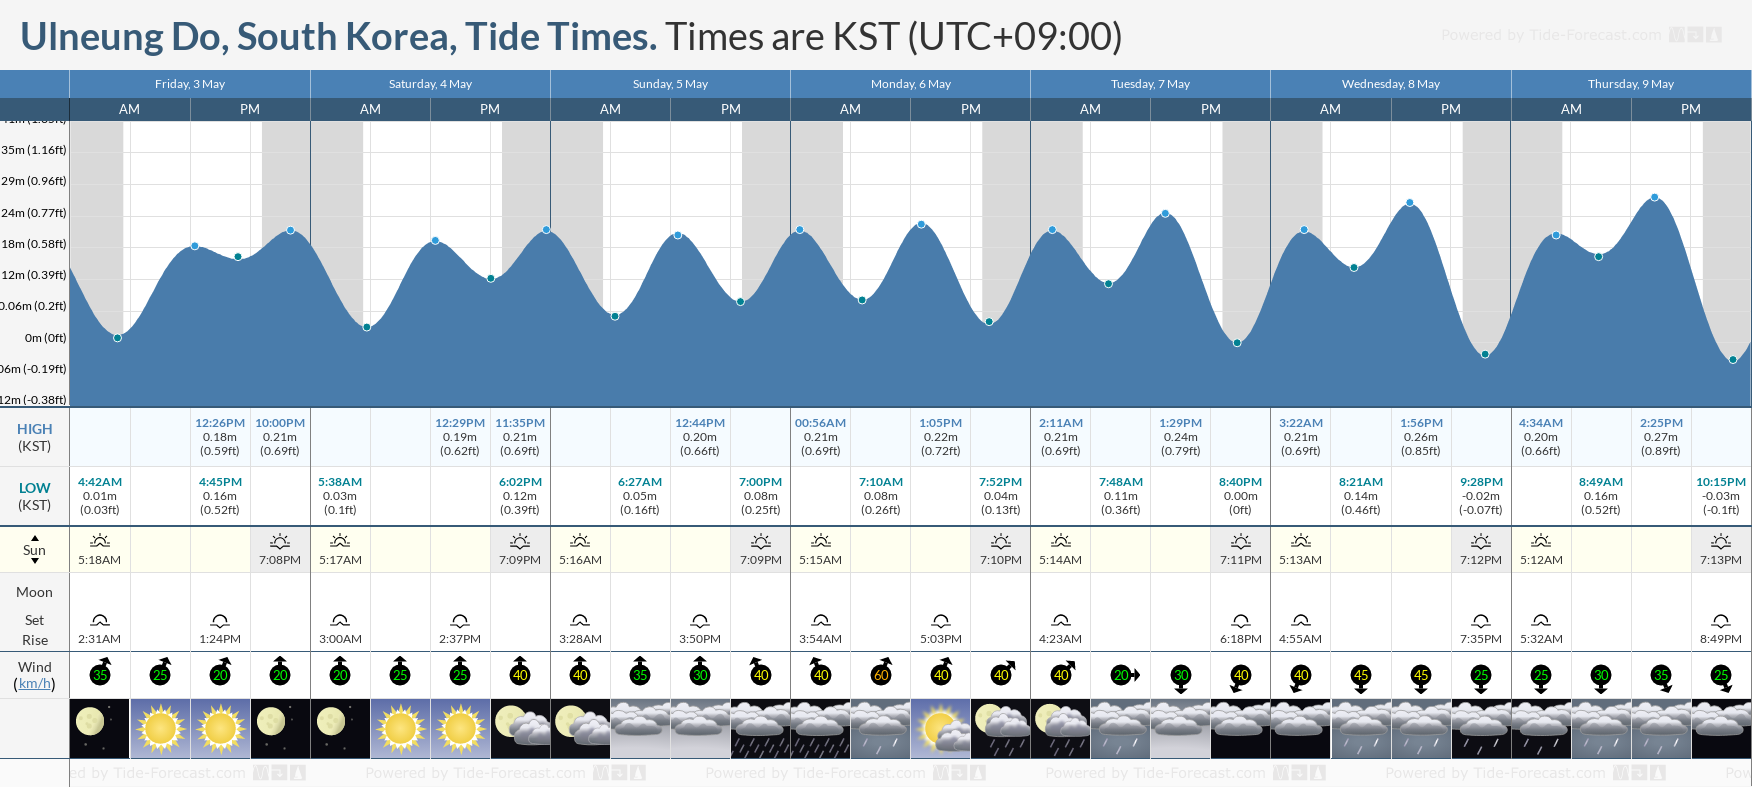 Ulneung Do, South Korea Tide Chart including high and low tide tide times for the next 7 days